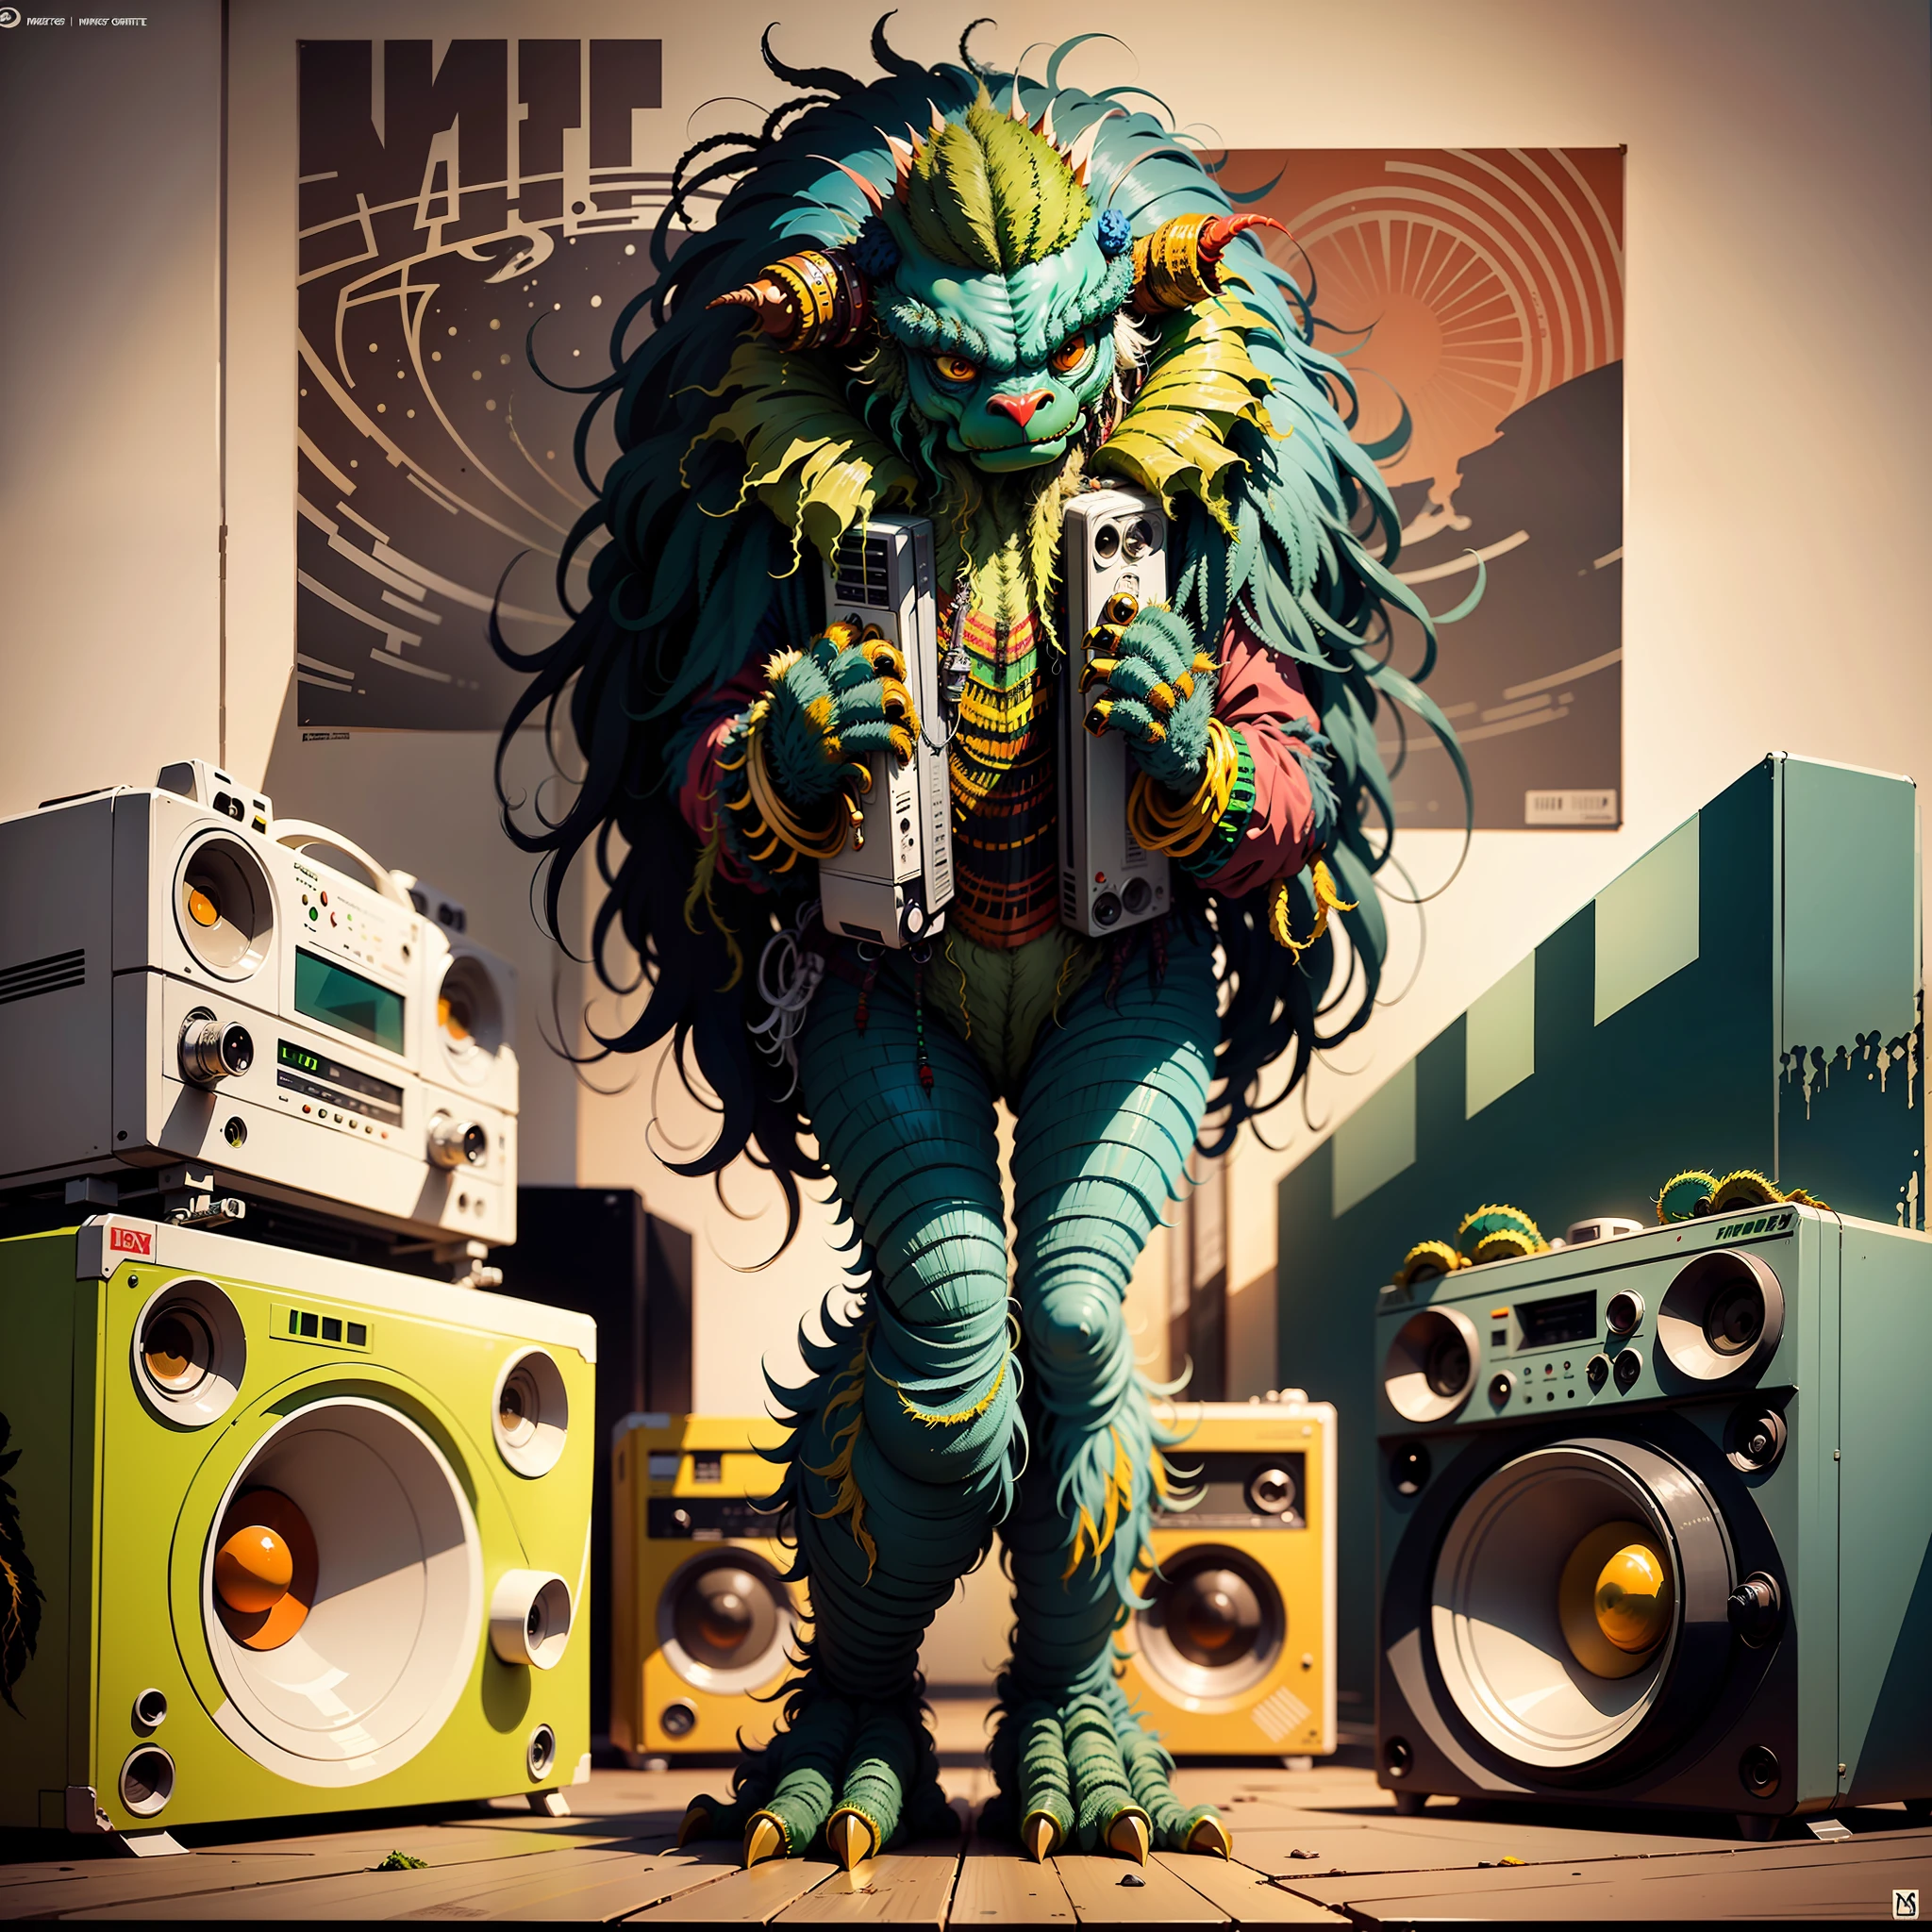 A ((((([rAstA monster creAture])))))), ( 全身照) holding A boombox, ghetto blAster, big ghetto blAster, tApe deck, 低保真嘻哈, Audio equipments, cAssette, 复古科技, nostAlgic vibes, 1 9 6 0 s 技术, rAdios, vintAge, 60 年代, propAgAndA Poster style, 海报设计, poster Art style. 20 世纪 70 年代, 20 世纪 50 年代, 20 世纪 60 年代, 海报色彩很丰富, colour Art, 三分法则, 鼓舞人心, 1970, 低保真嘻哈, high quAlity Artwork, Artwork, poster Art style, promotionAl Artwork, 嘻哈, 1 9日, 打印, high quAlity wAllpAper, poster Artwork, style of shepherd fAirey, in A retro or vintAge style, reminiscent of clAssic Advertisements or posters. Use wArm And muted colors, cApturing the nostAlgic feel of vintAge Artwork, 鸟瞰图